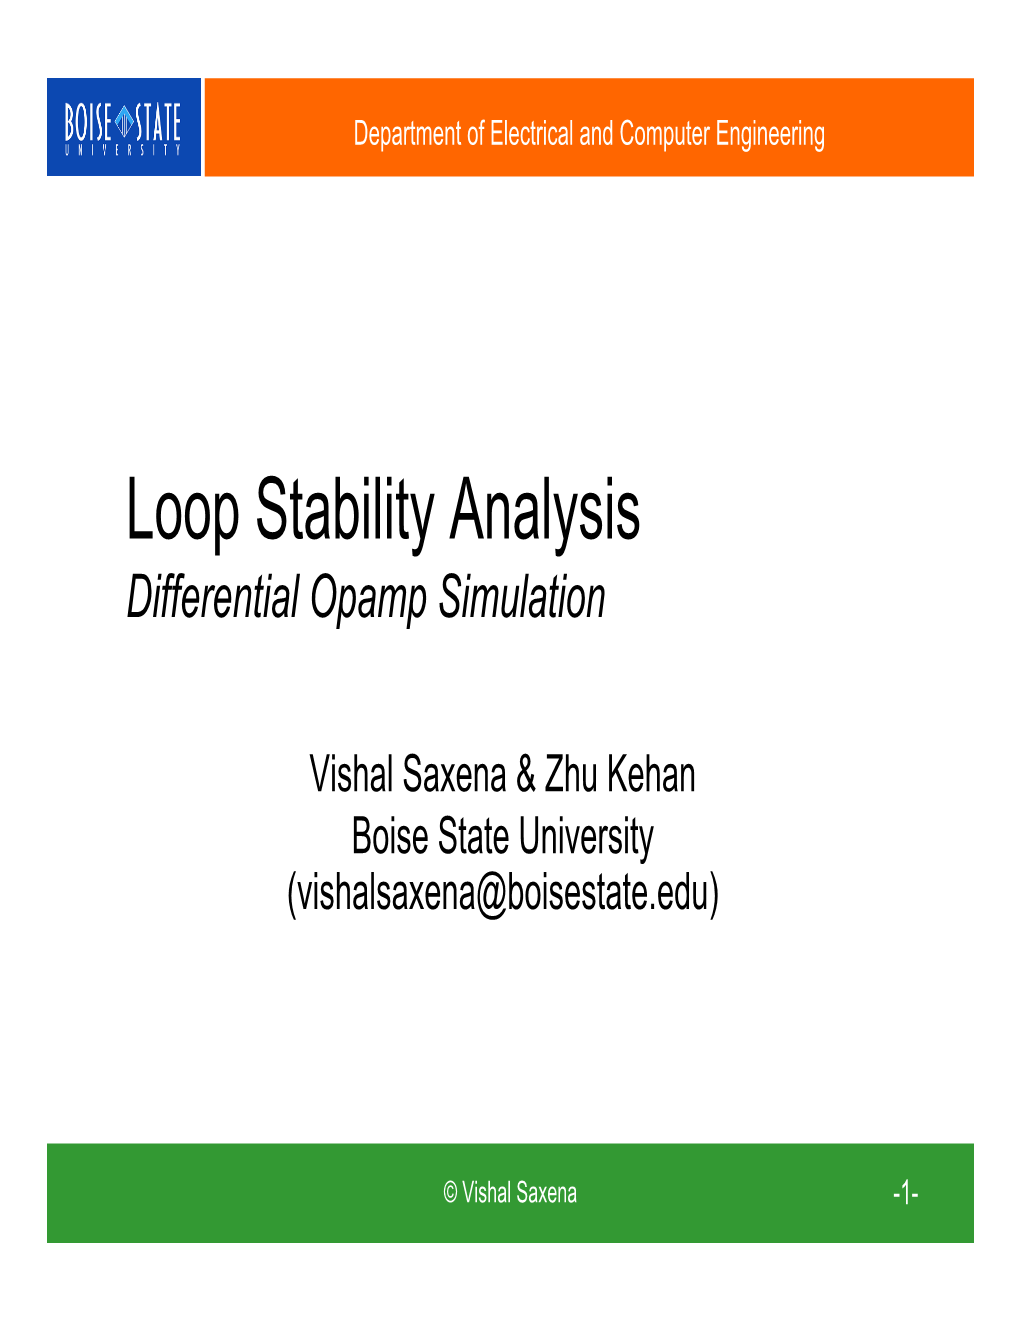 Loop Stability Analysis Differential Opamp Simulation